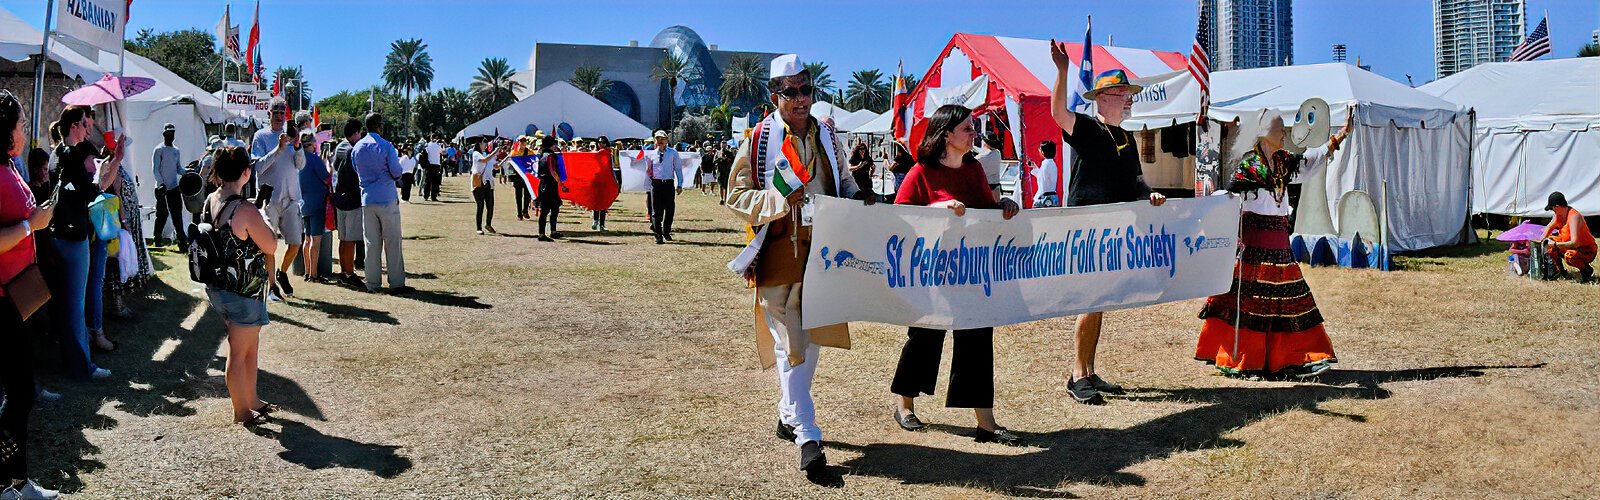 Members of the Board of Directors of SPIFFS (St Petersburg International Folk Fair Society) take part in the Parade of Nations. After a hiatus of two years due to the pandemic, the fair is back in St Petersburg.